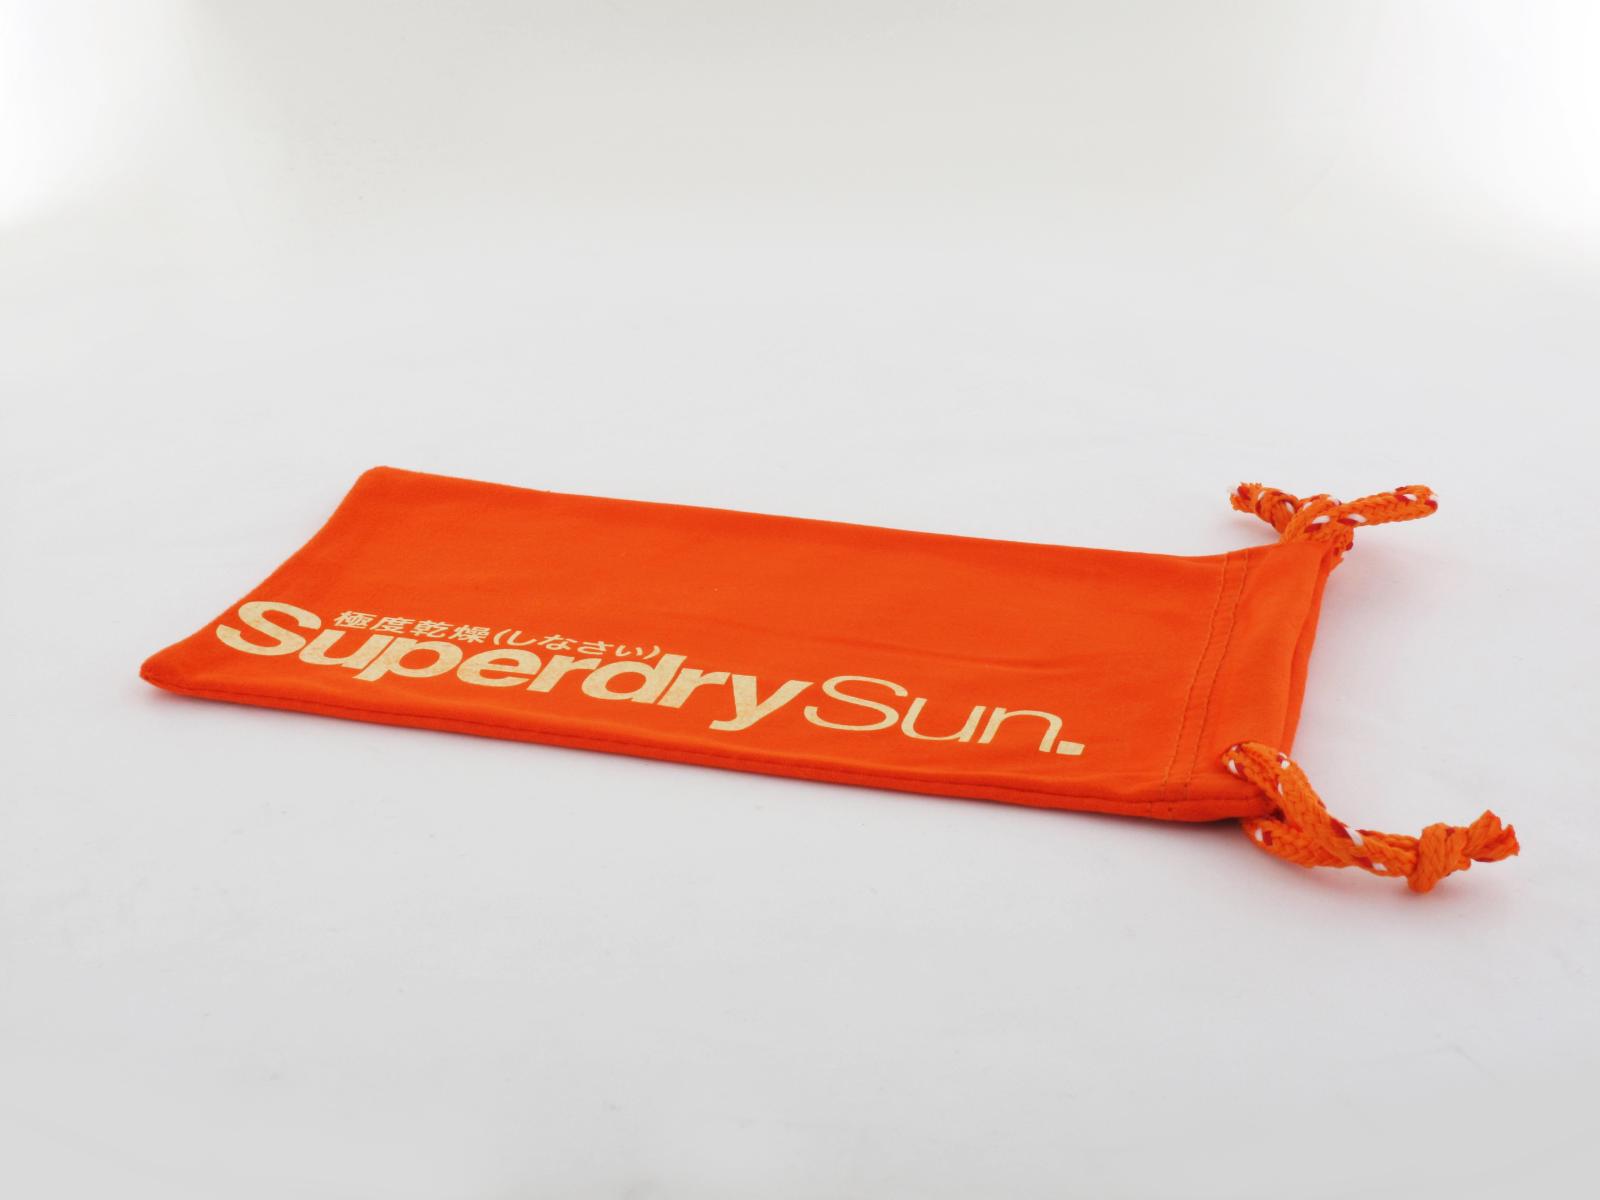 Superdry | Trident 002 56 | silver / green